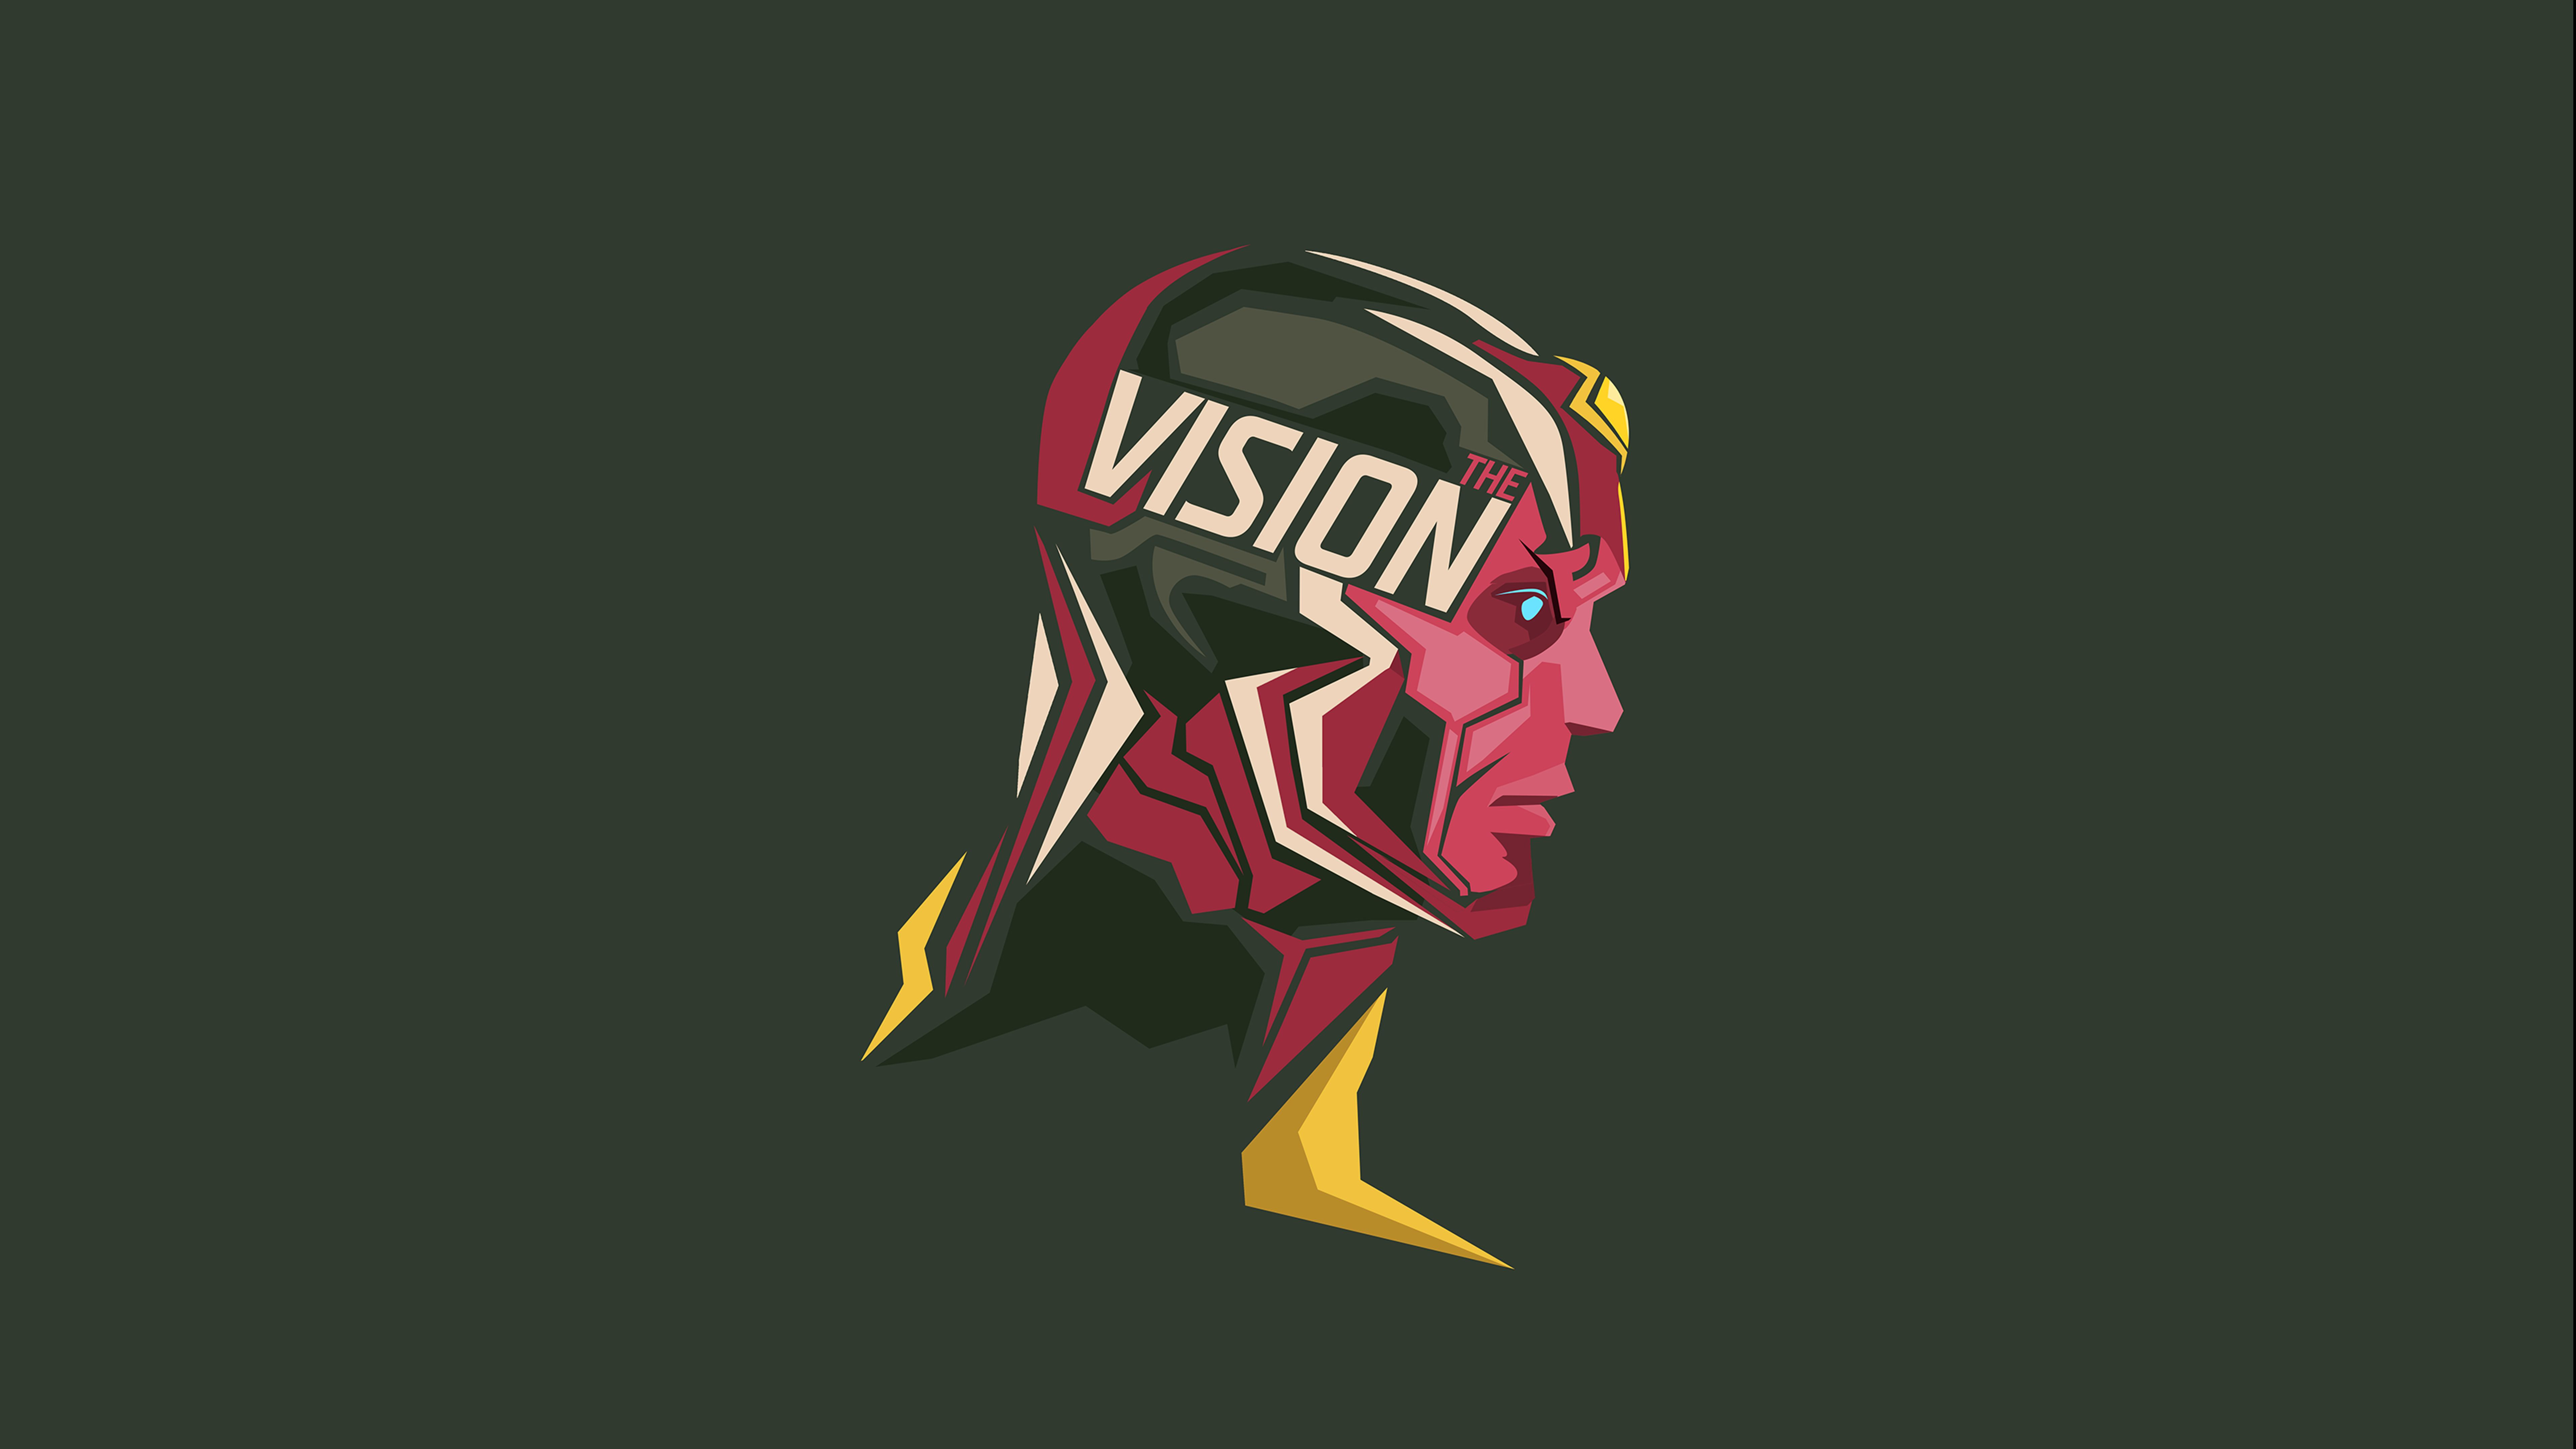 Vision Widescreen image